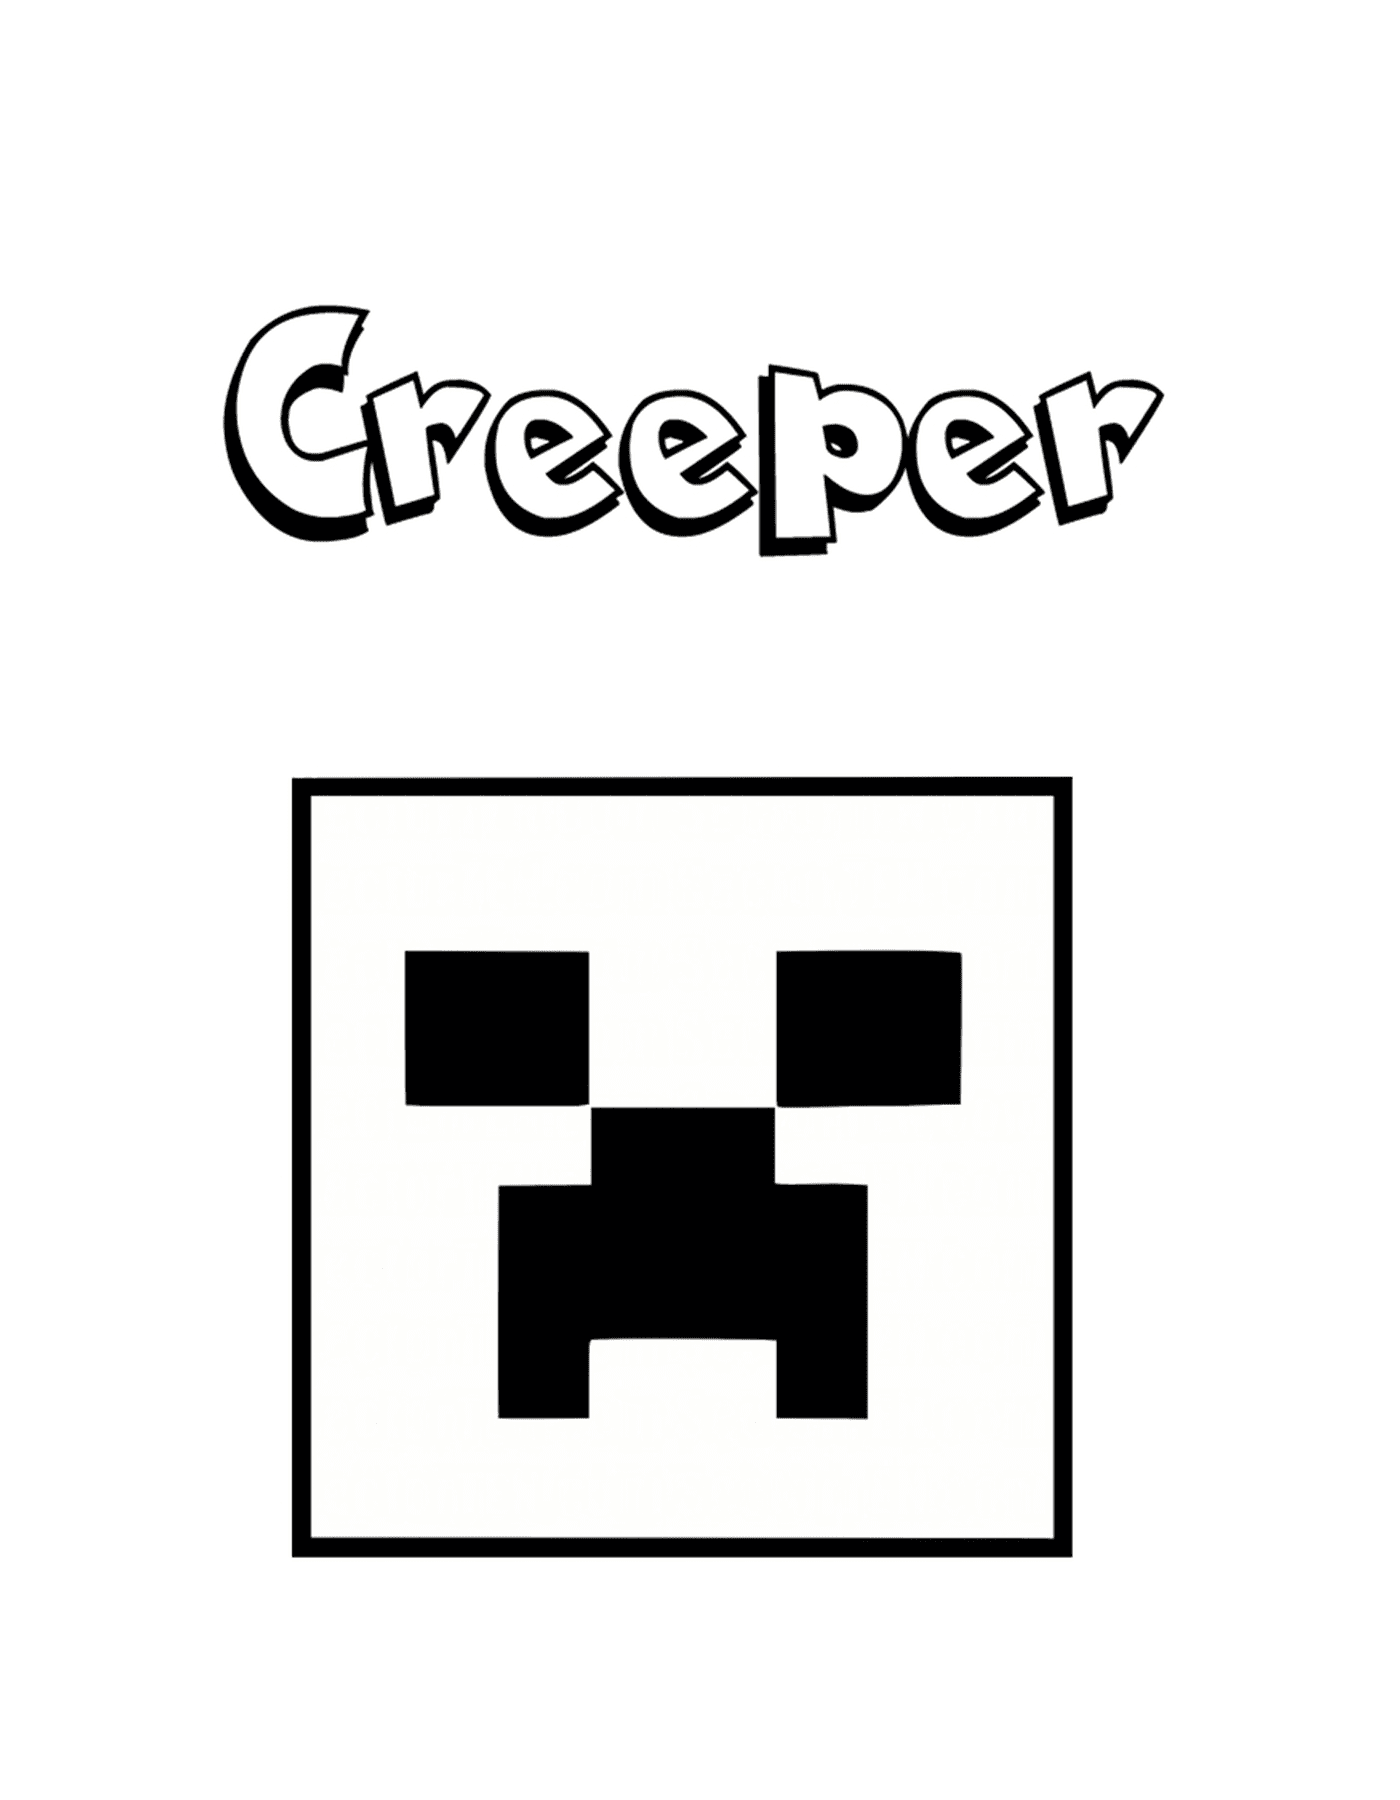  Creepers ikonisches Gesicht 